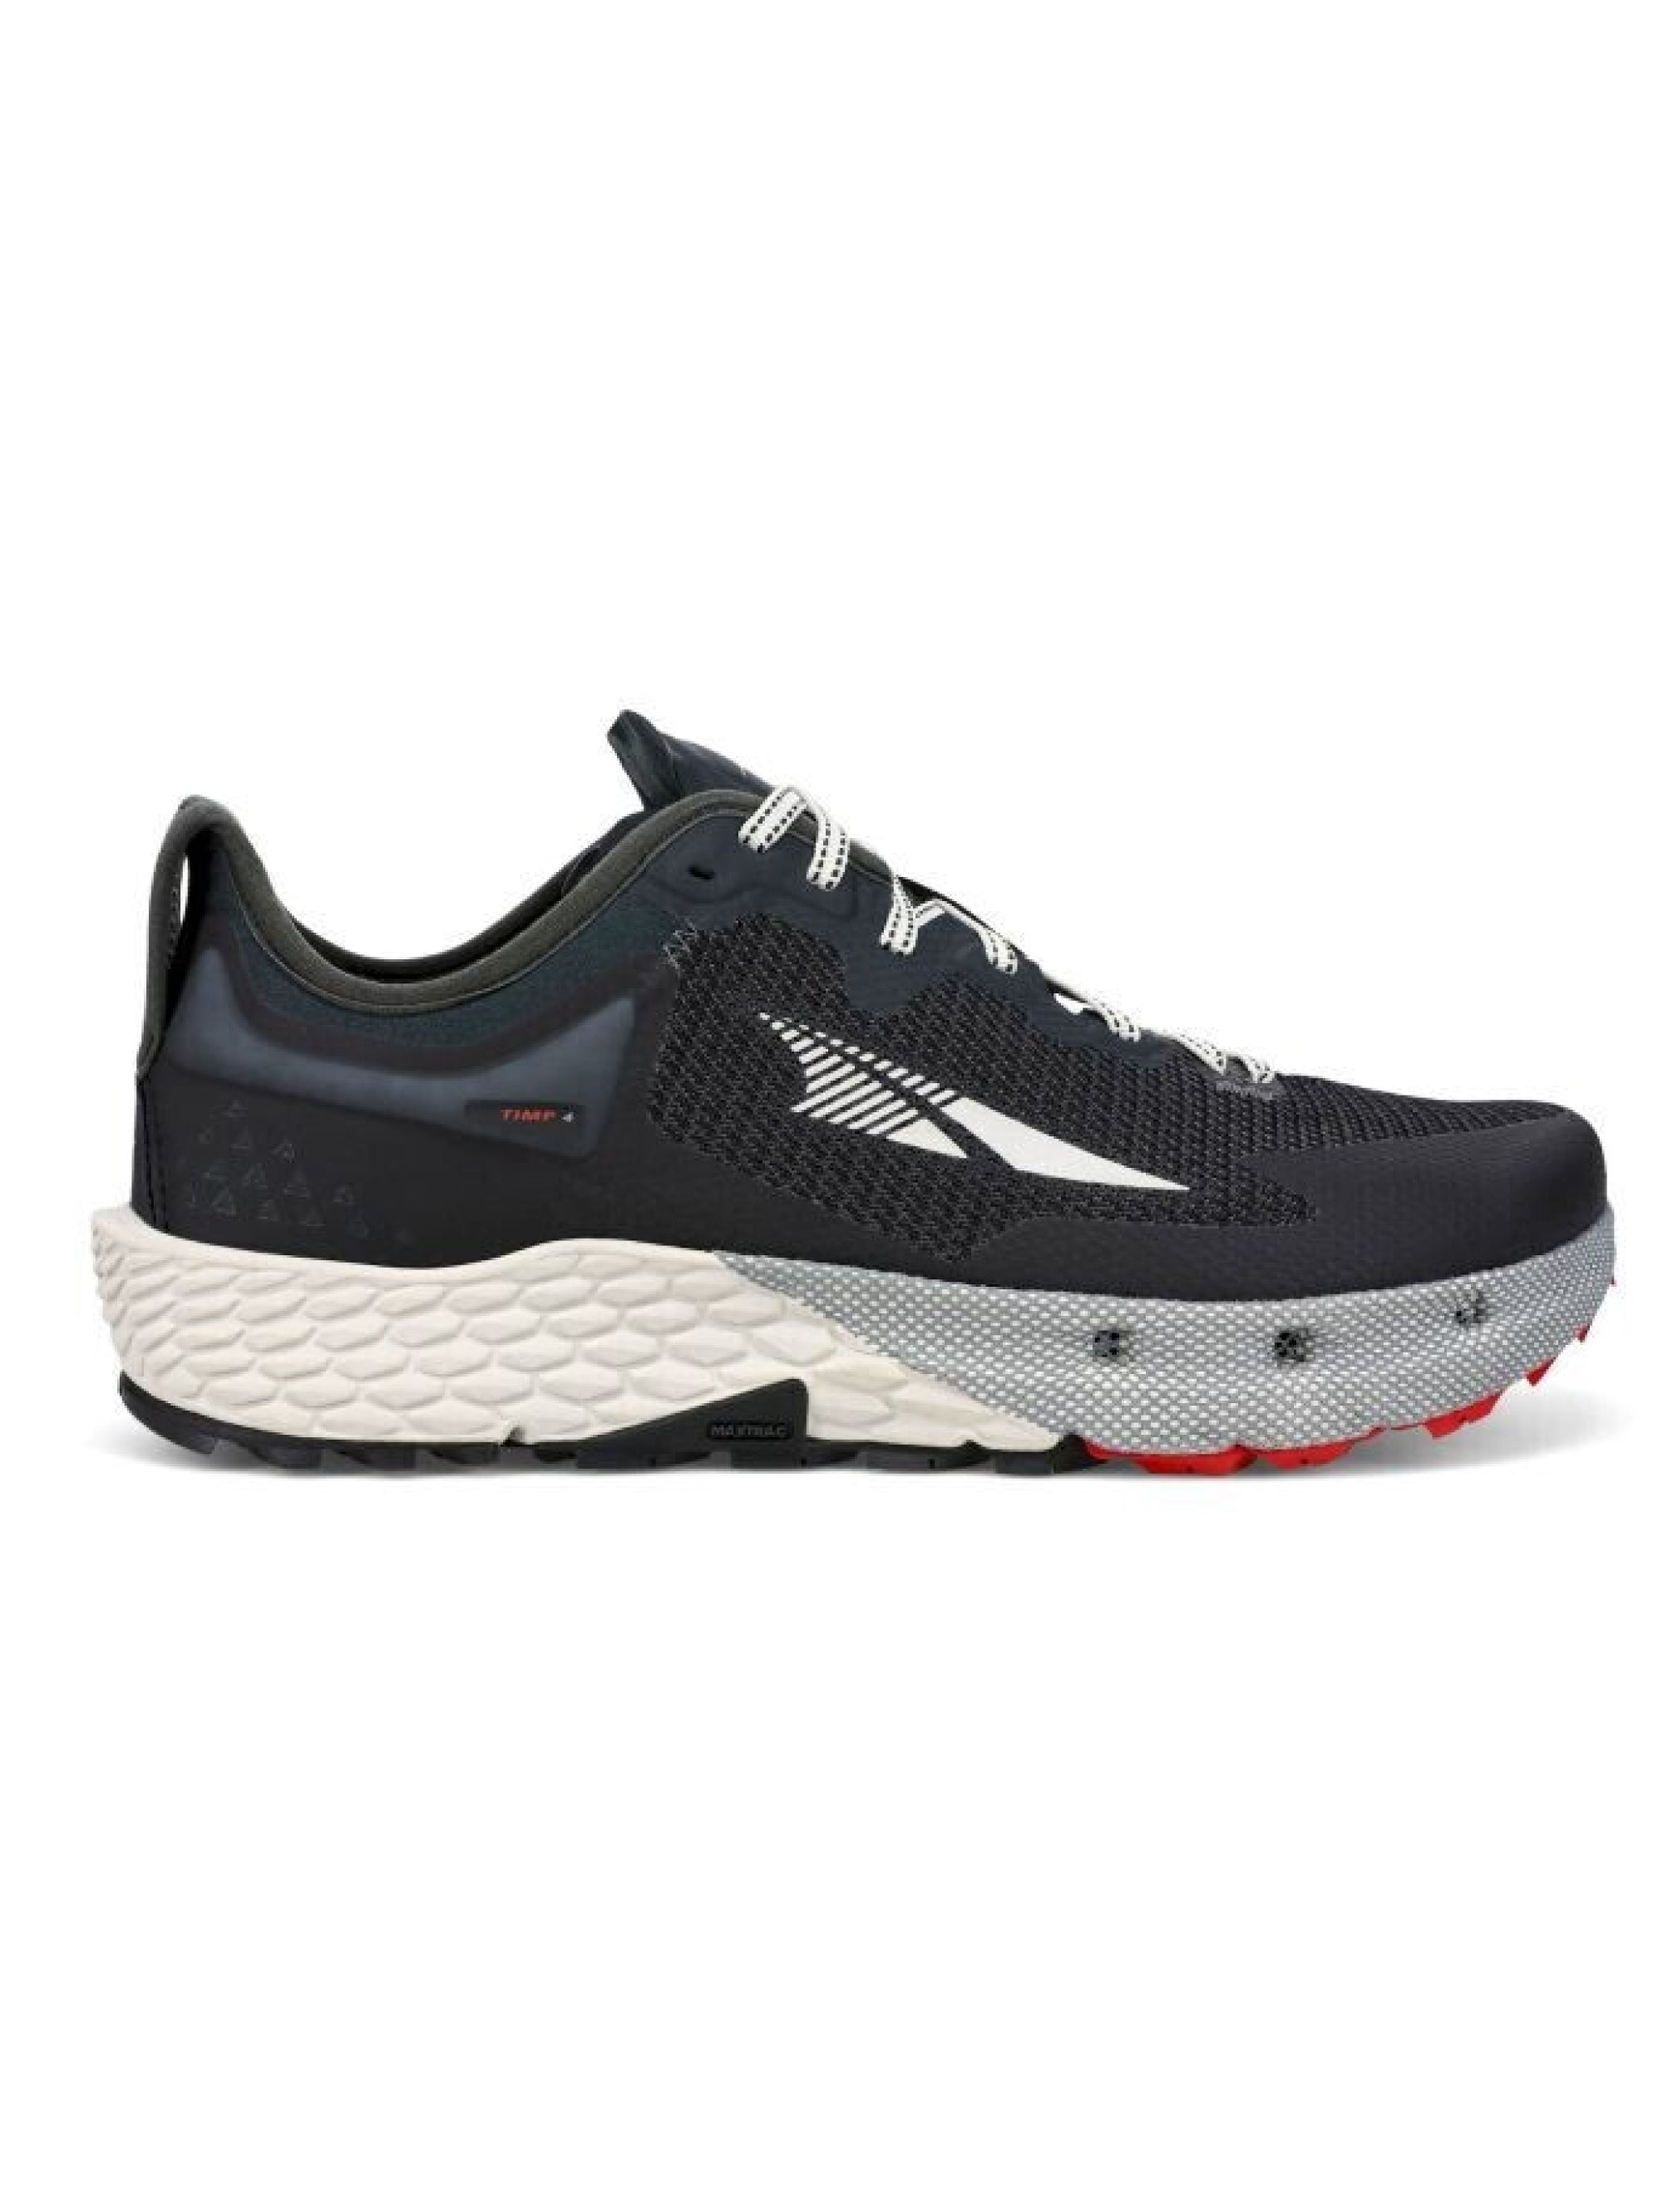 Trail Running Shoes Timp 4 Black